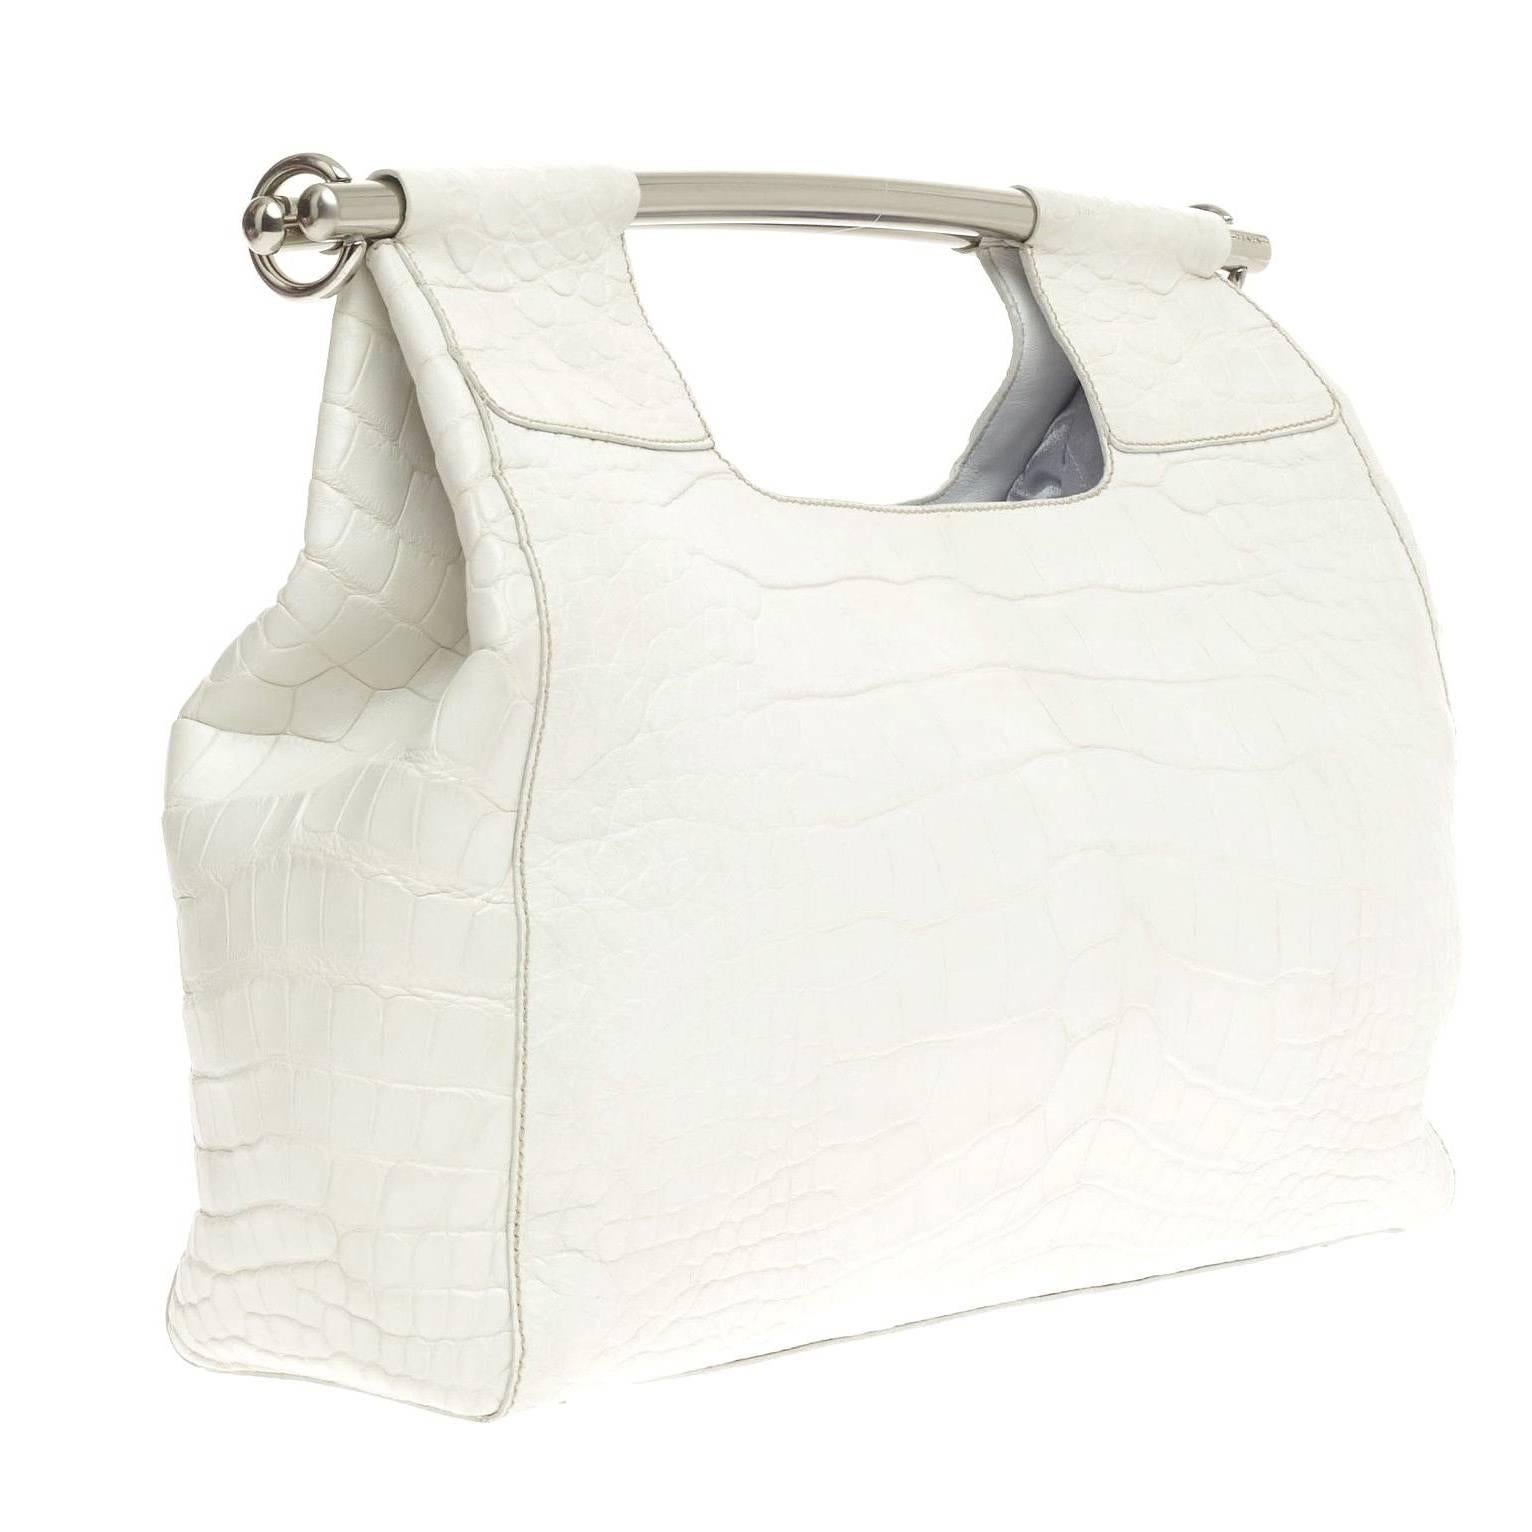 A stunning Prada Alligator Skin Handbag
Finest white mat soft exotic skin - no print
In excellent condition
Prada Triangle logo on side
Fully lined
One zipped inner pocket
Metal bar handel
Made in Italy
Comes with authenticity card and